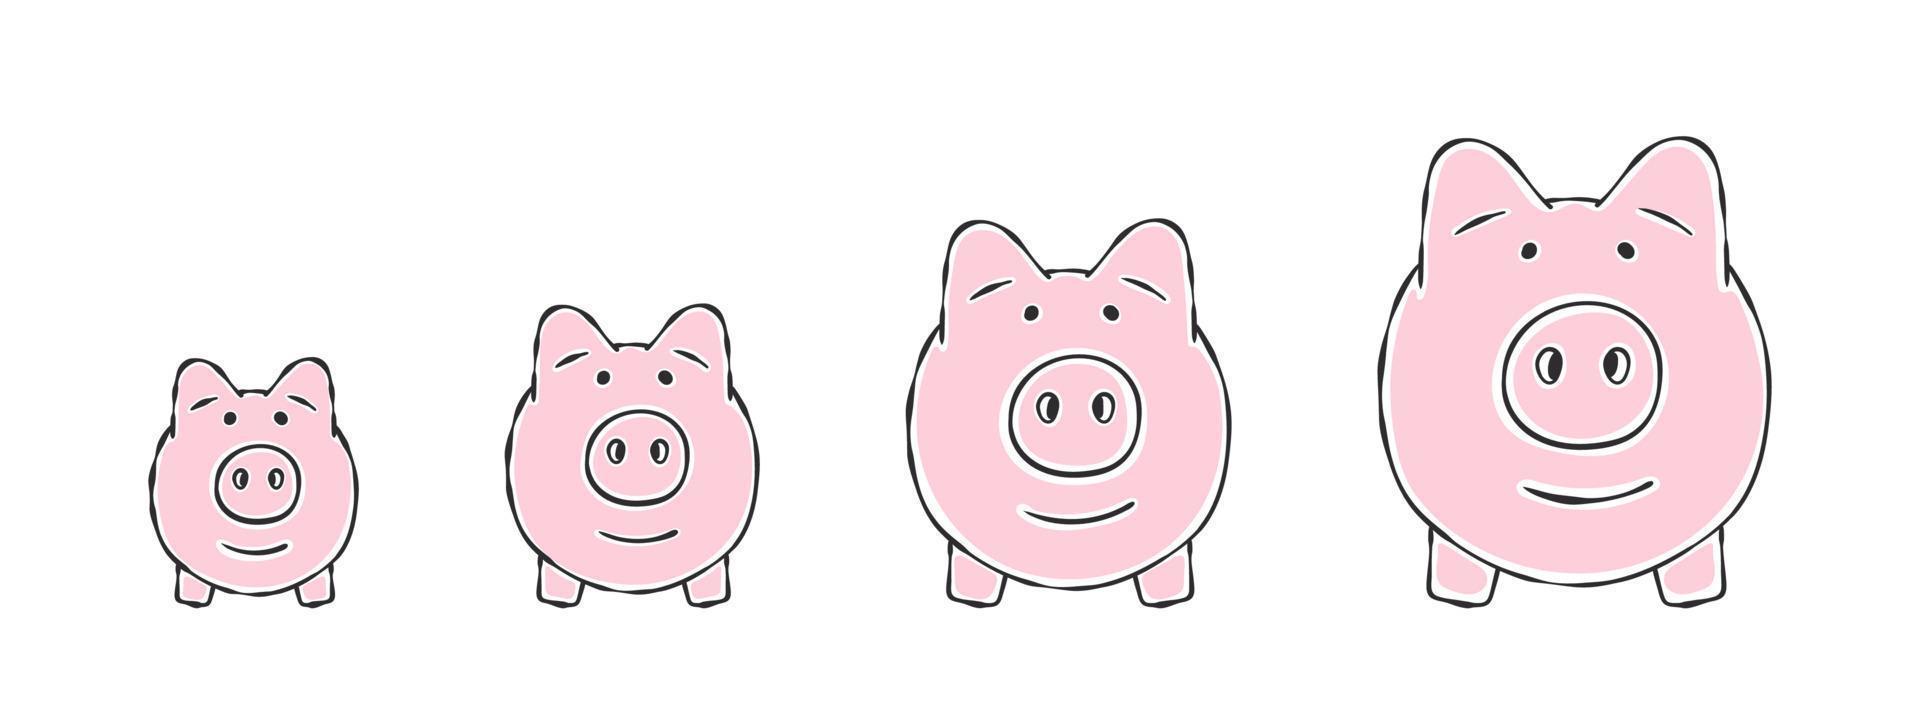 Piggy banks. Piggy banks from small to large. Hand drawn image. Vector illustration